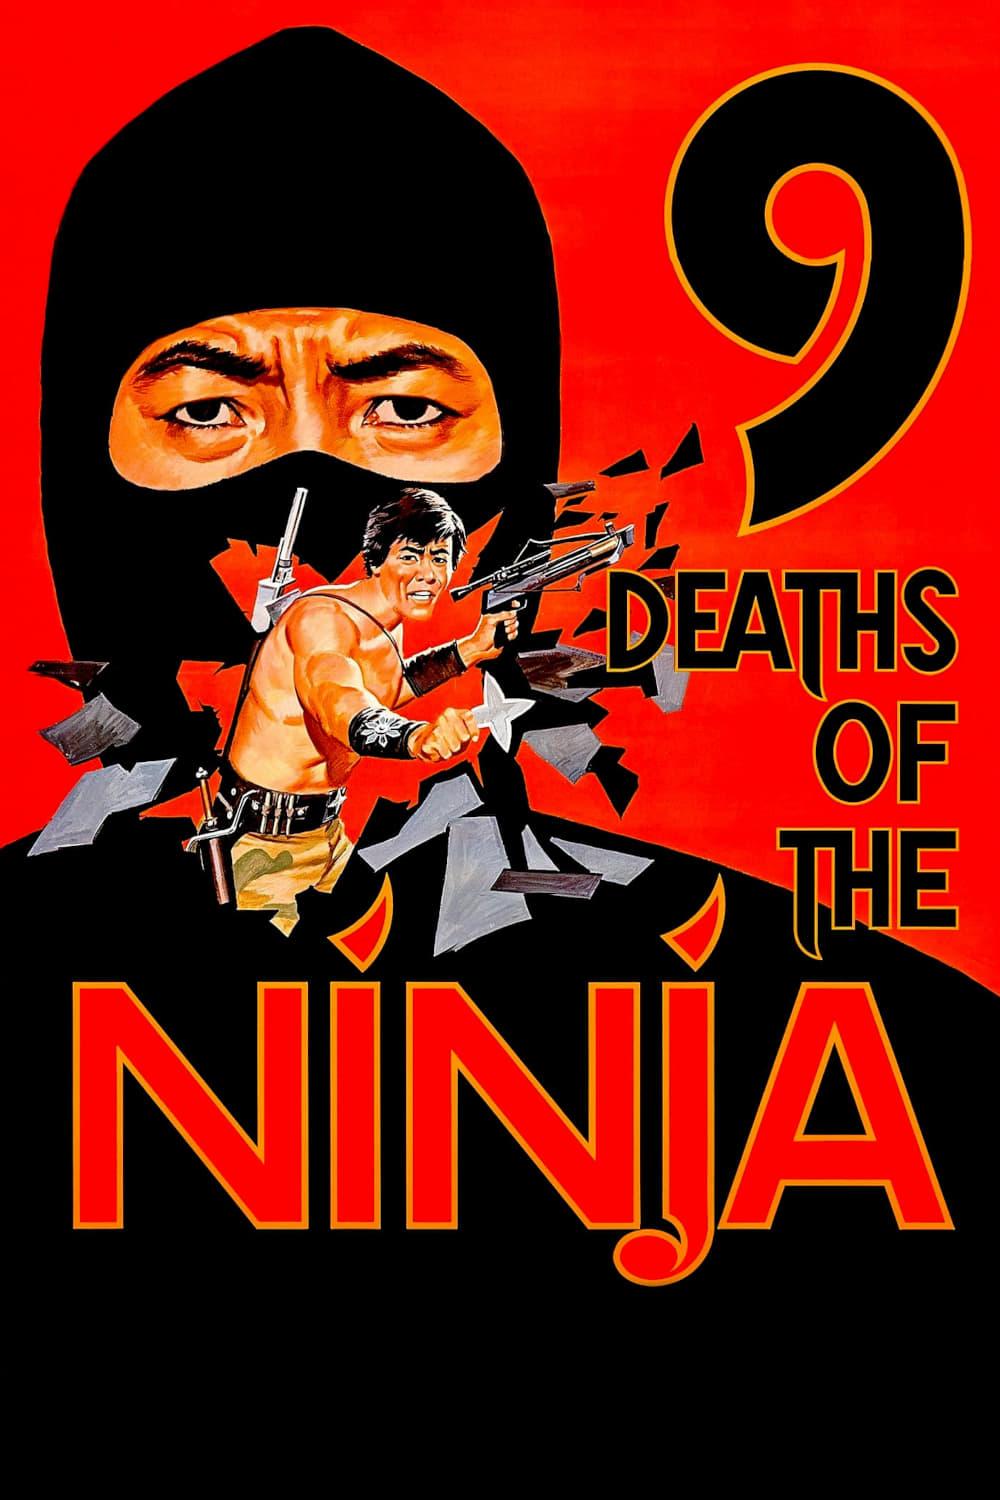 9 Deaths of the Ninja poster